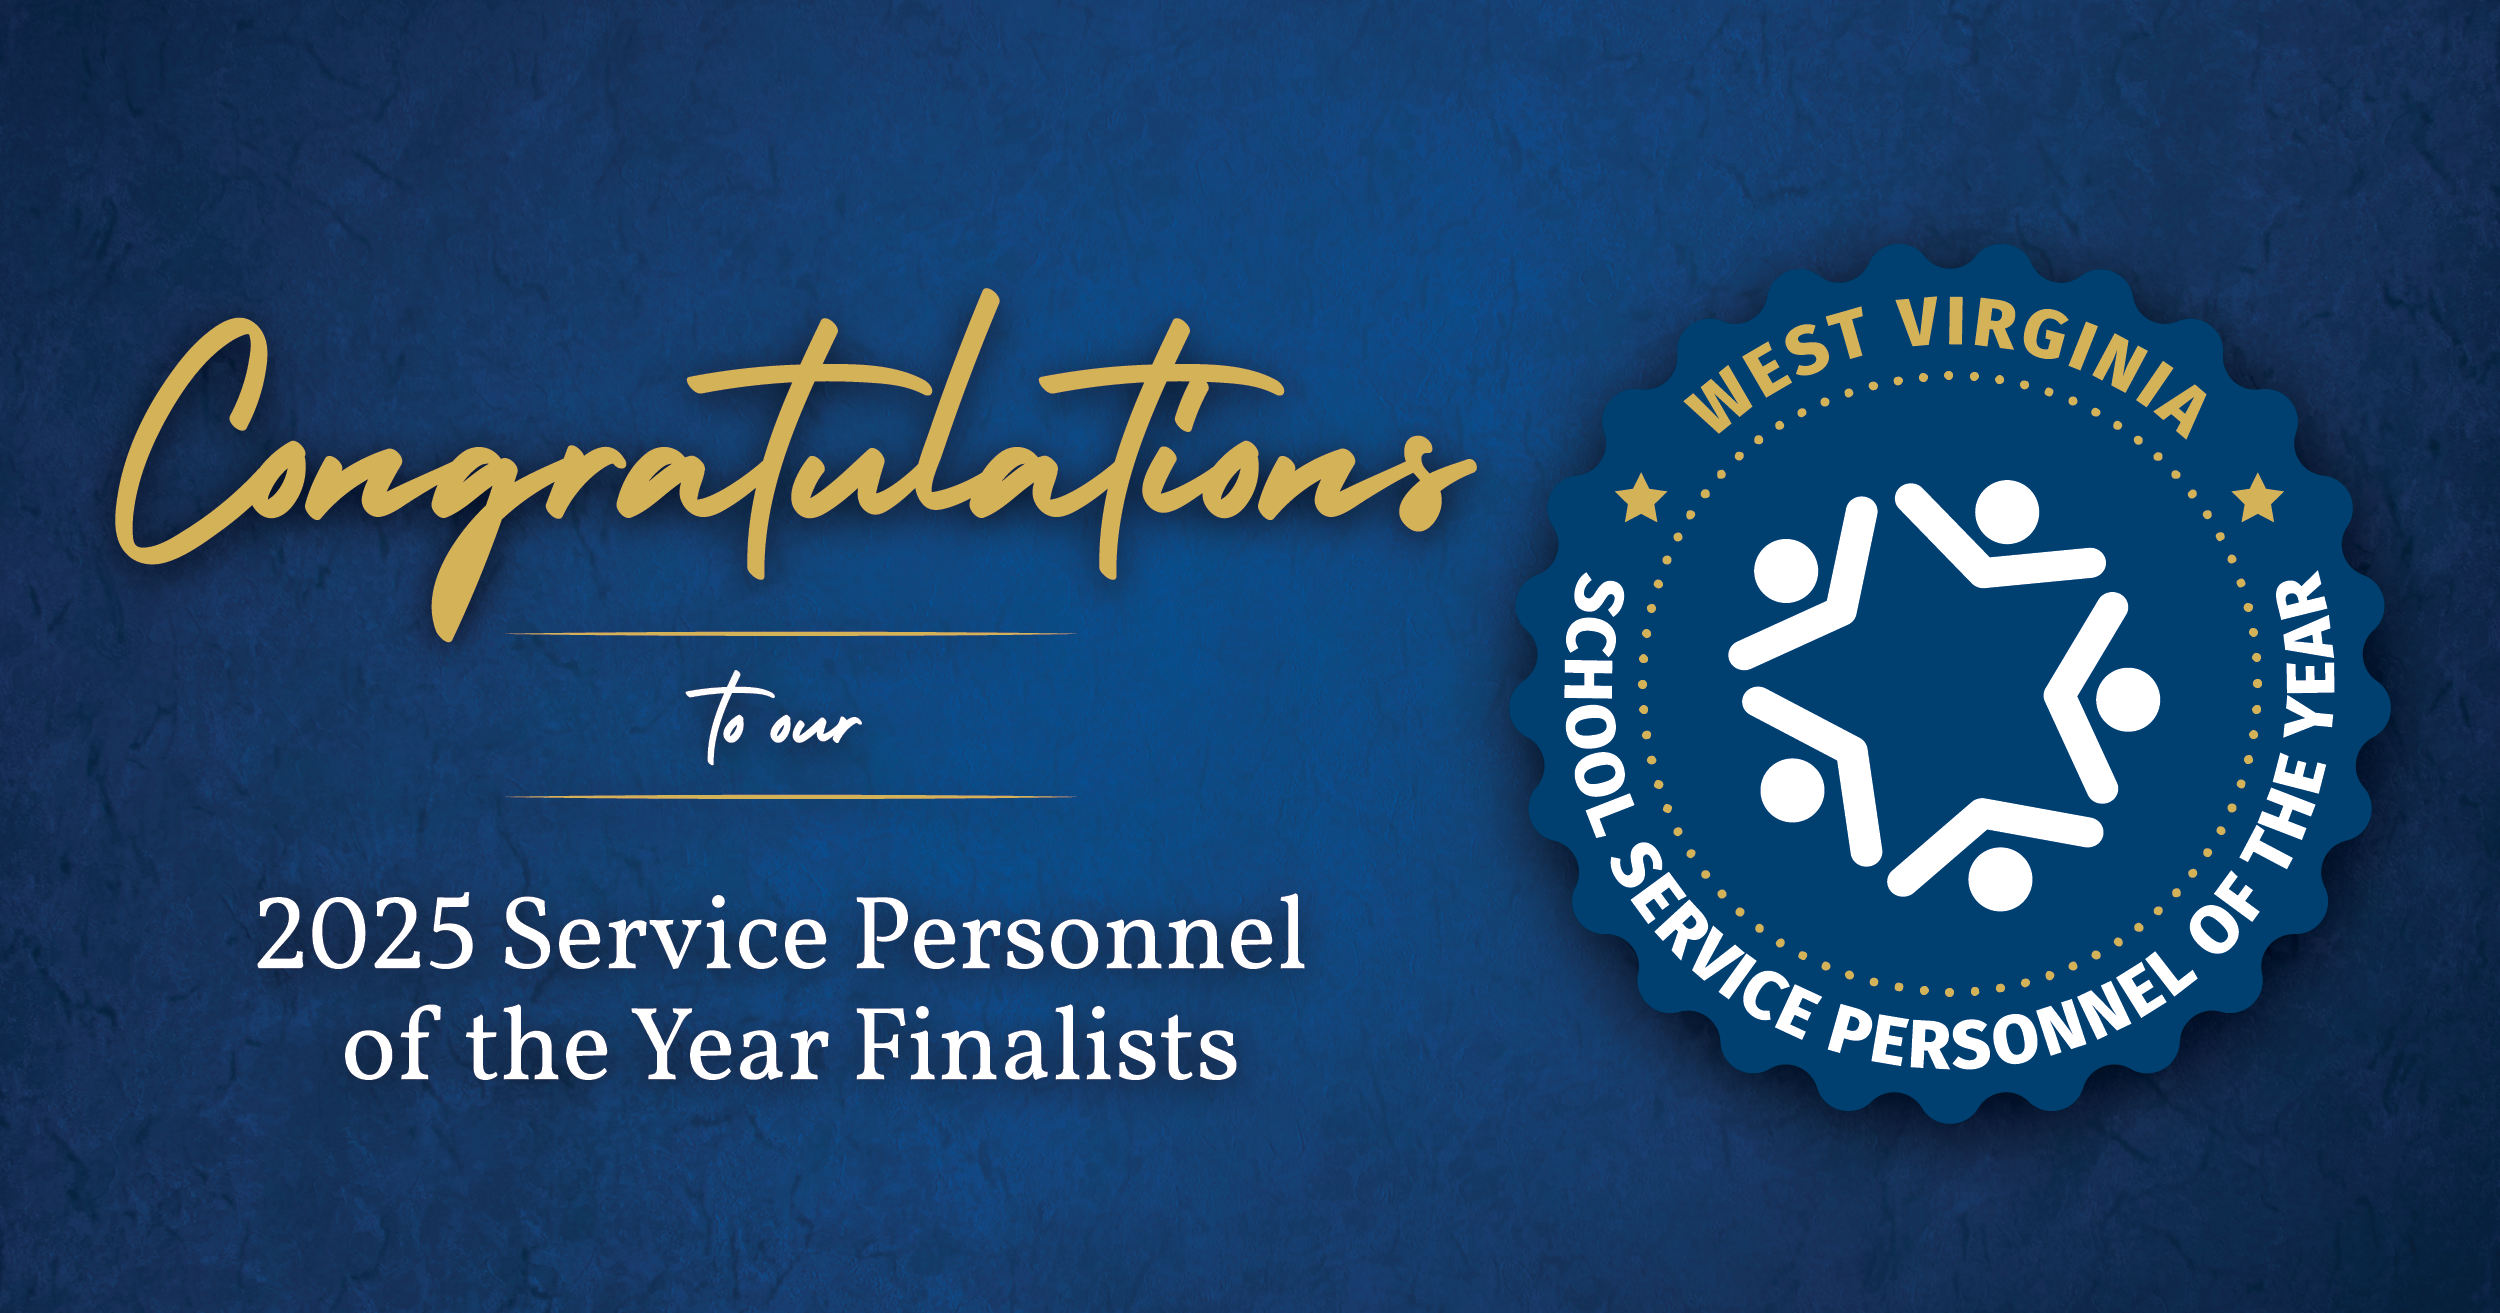 Graphic with the words "Congratulations to our Service Personnel of the Year Finalists" on it